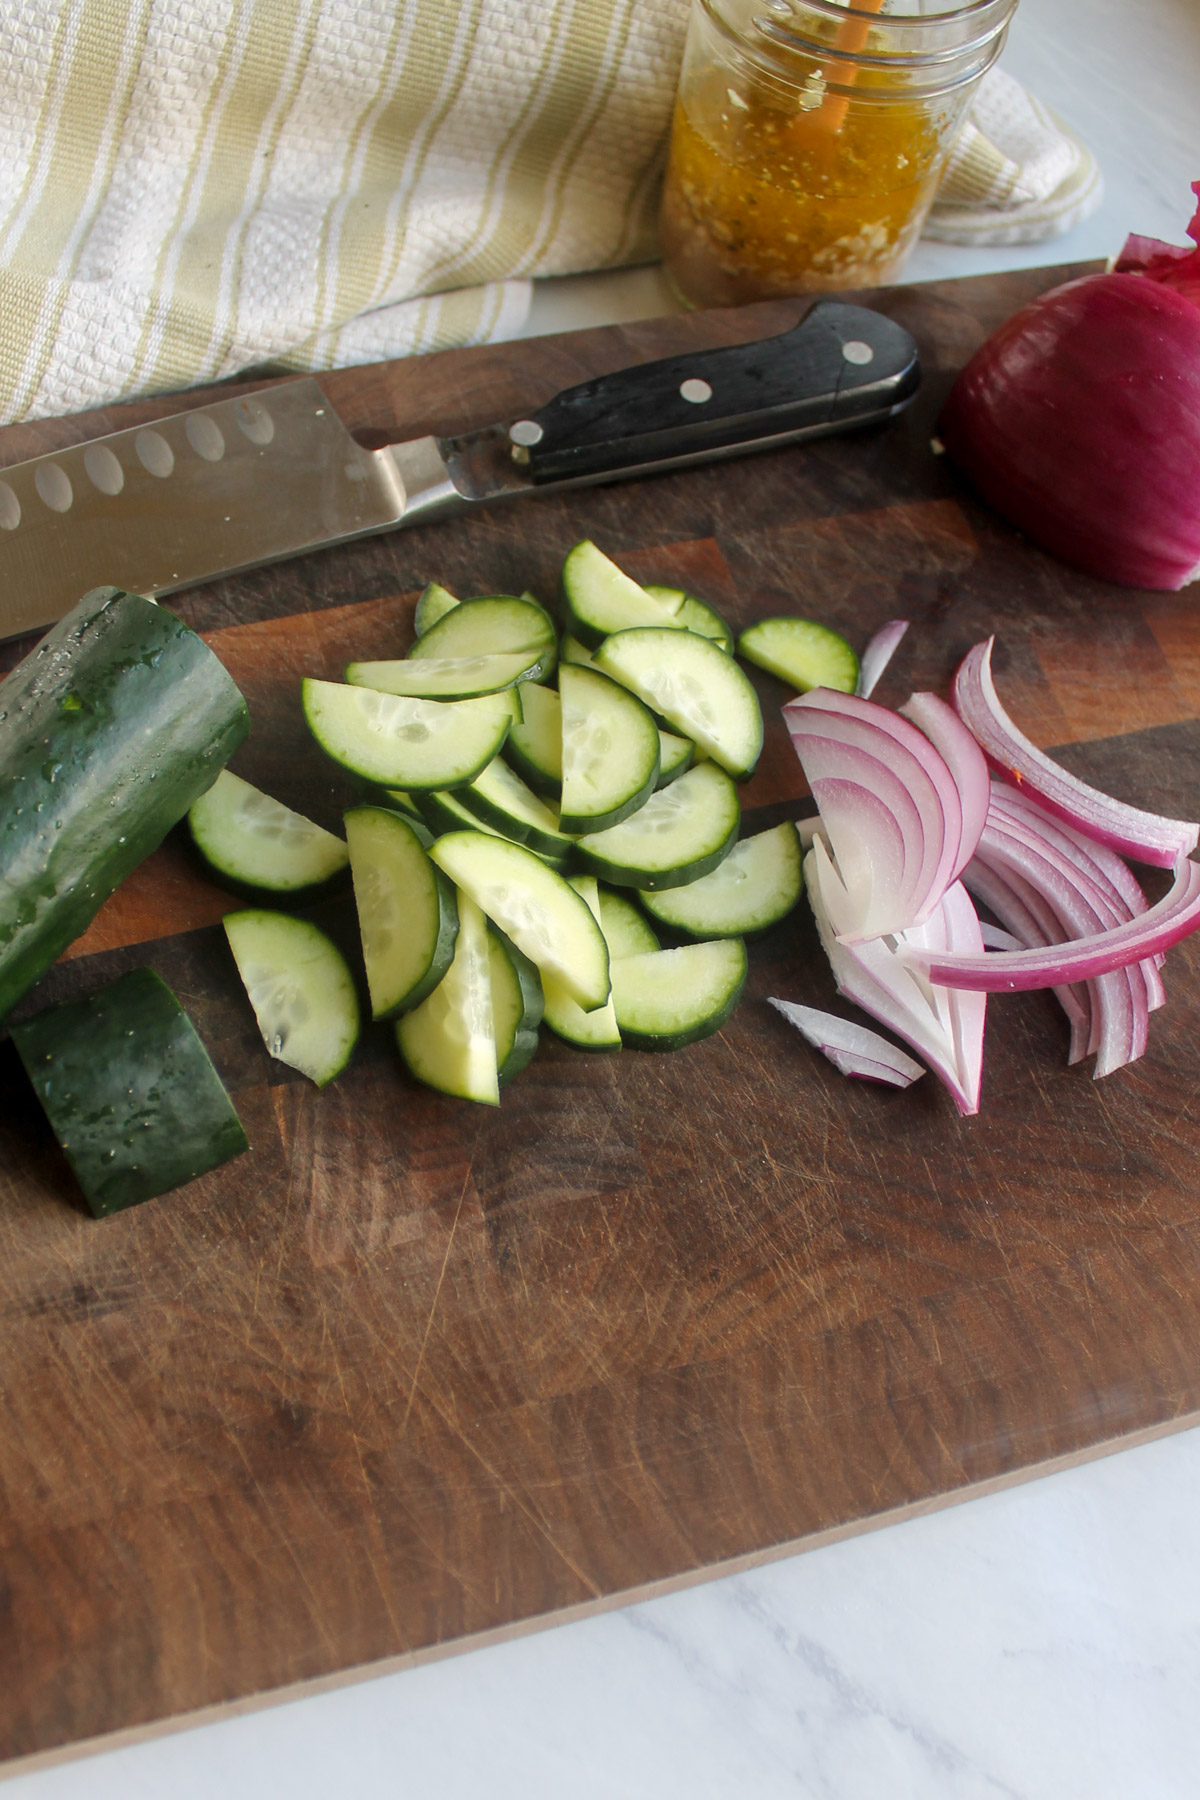 Sliced red onion and cucumbers on a cutting board.